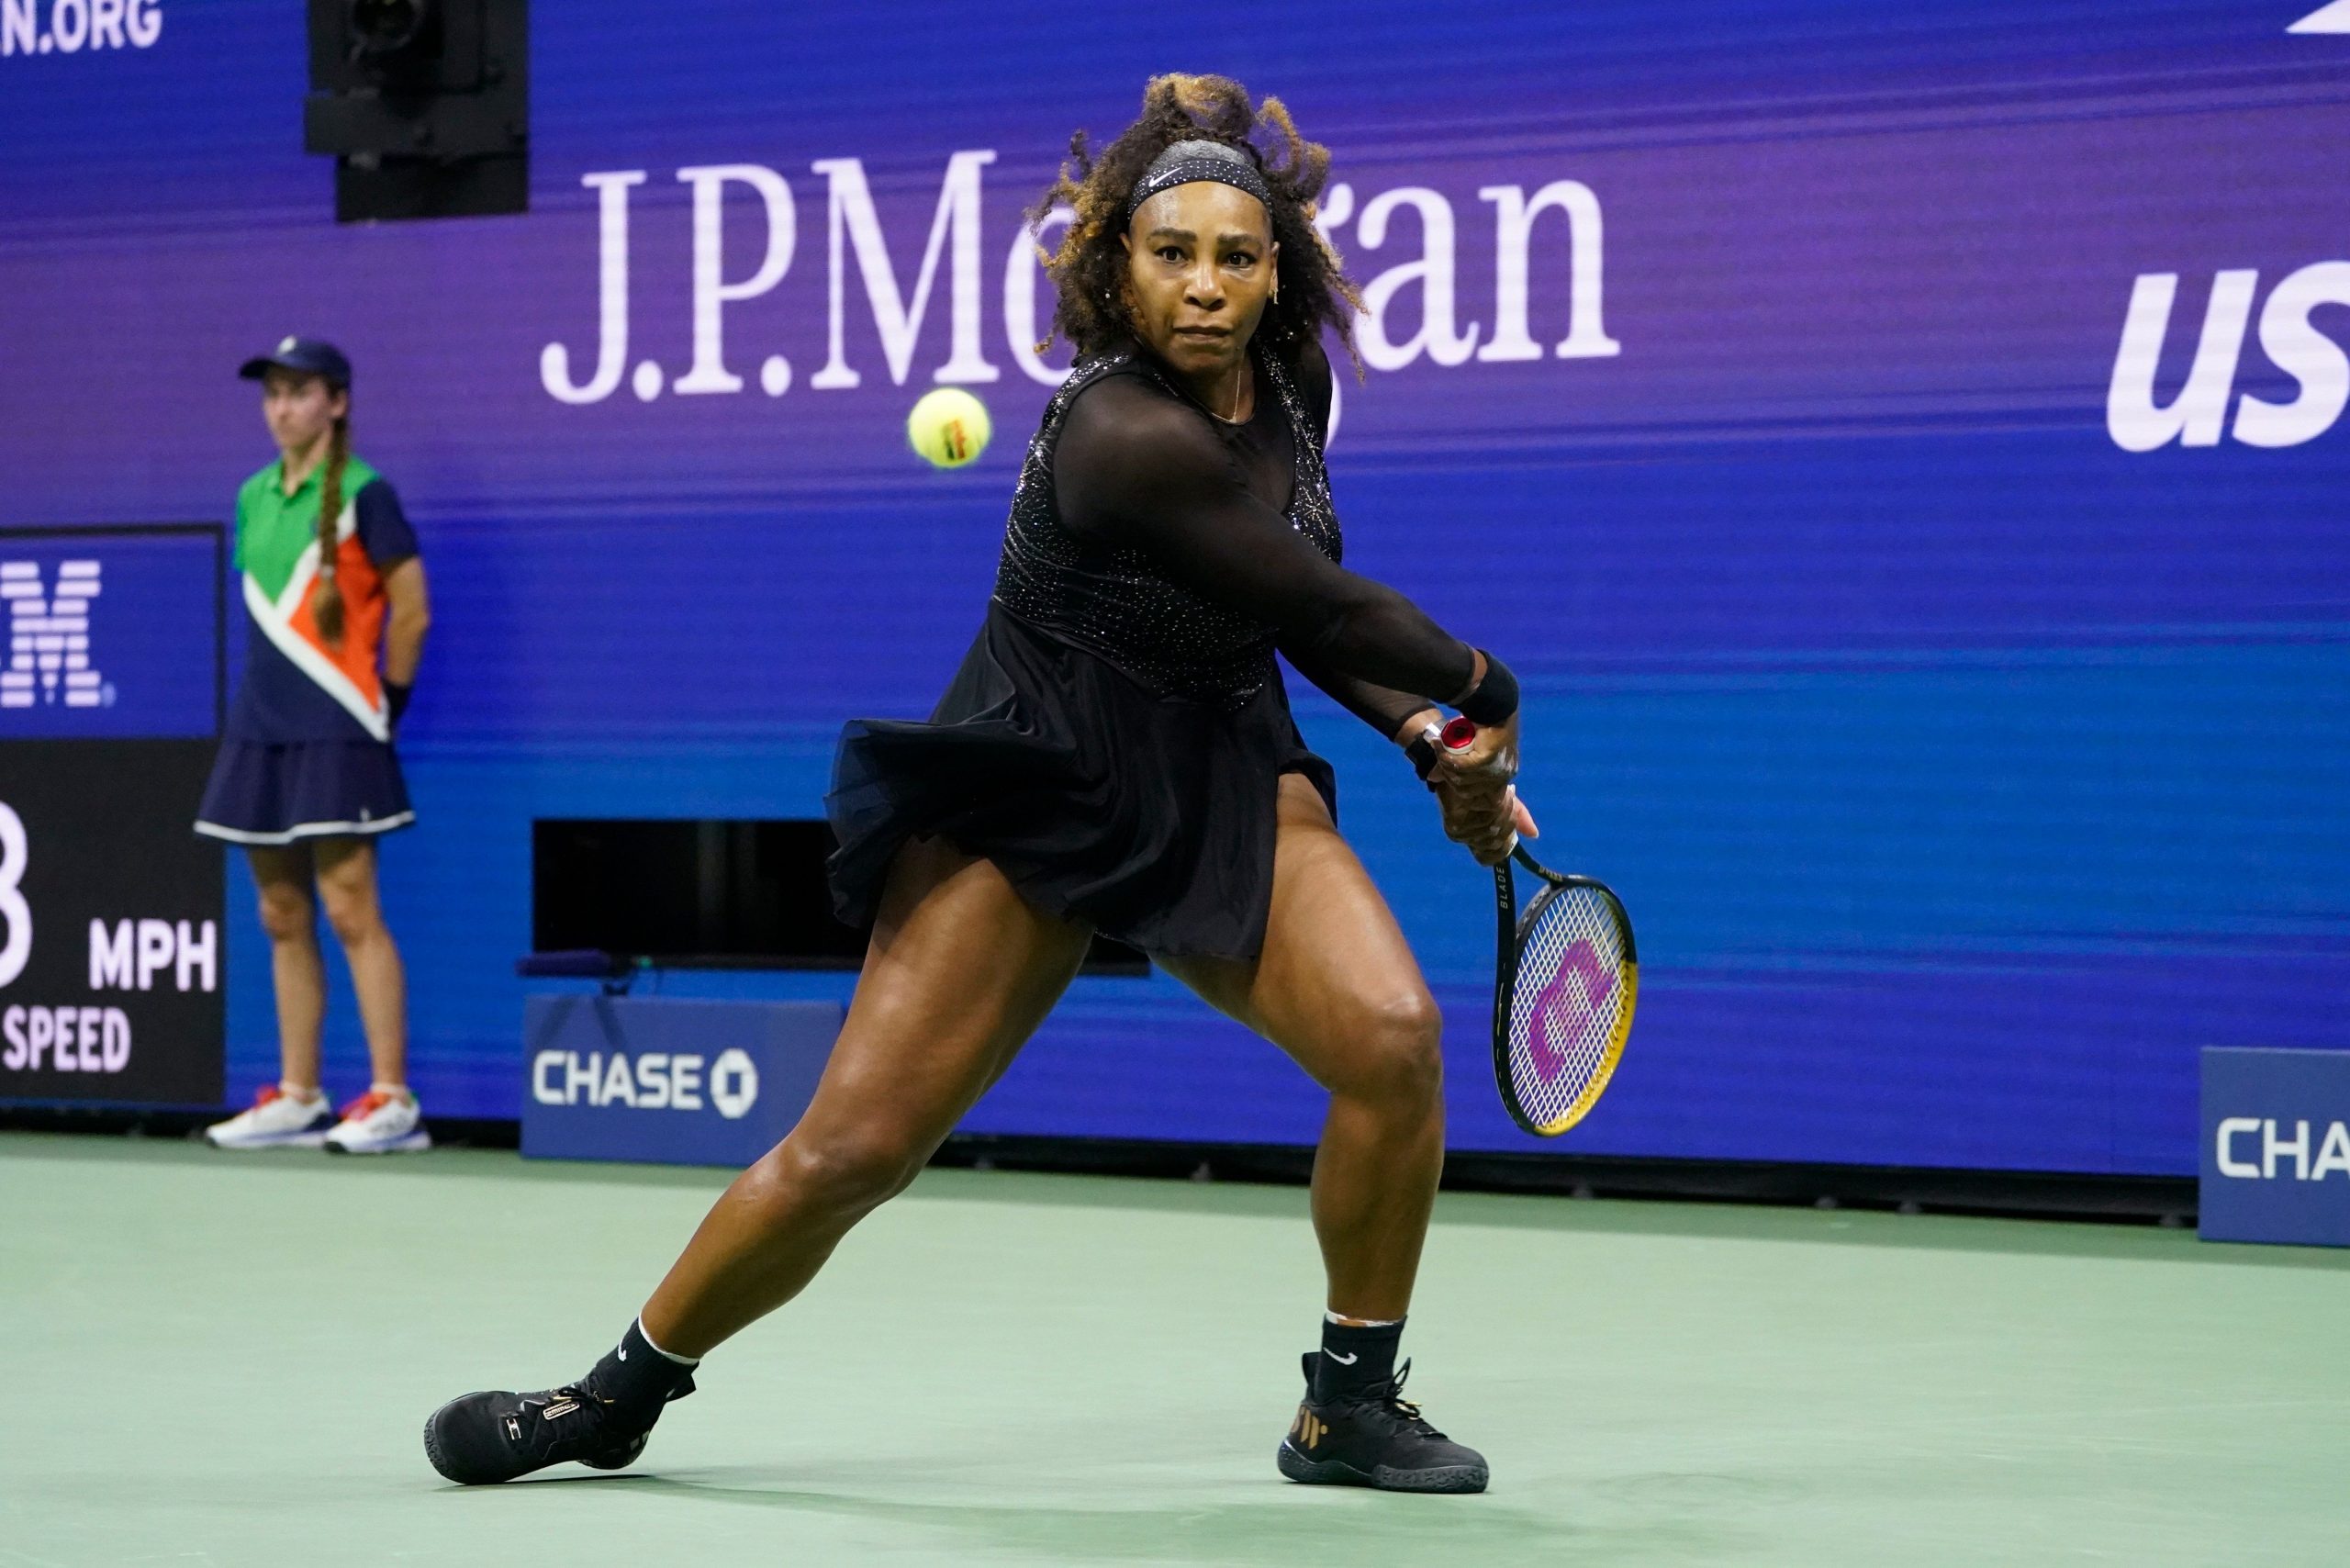 Serena Williams age, family: All you need to know